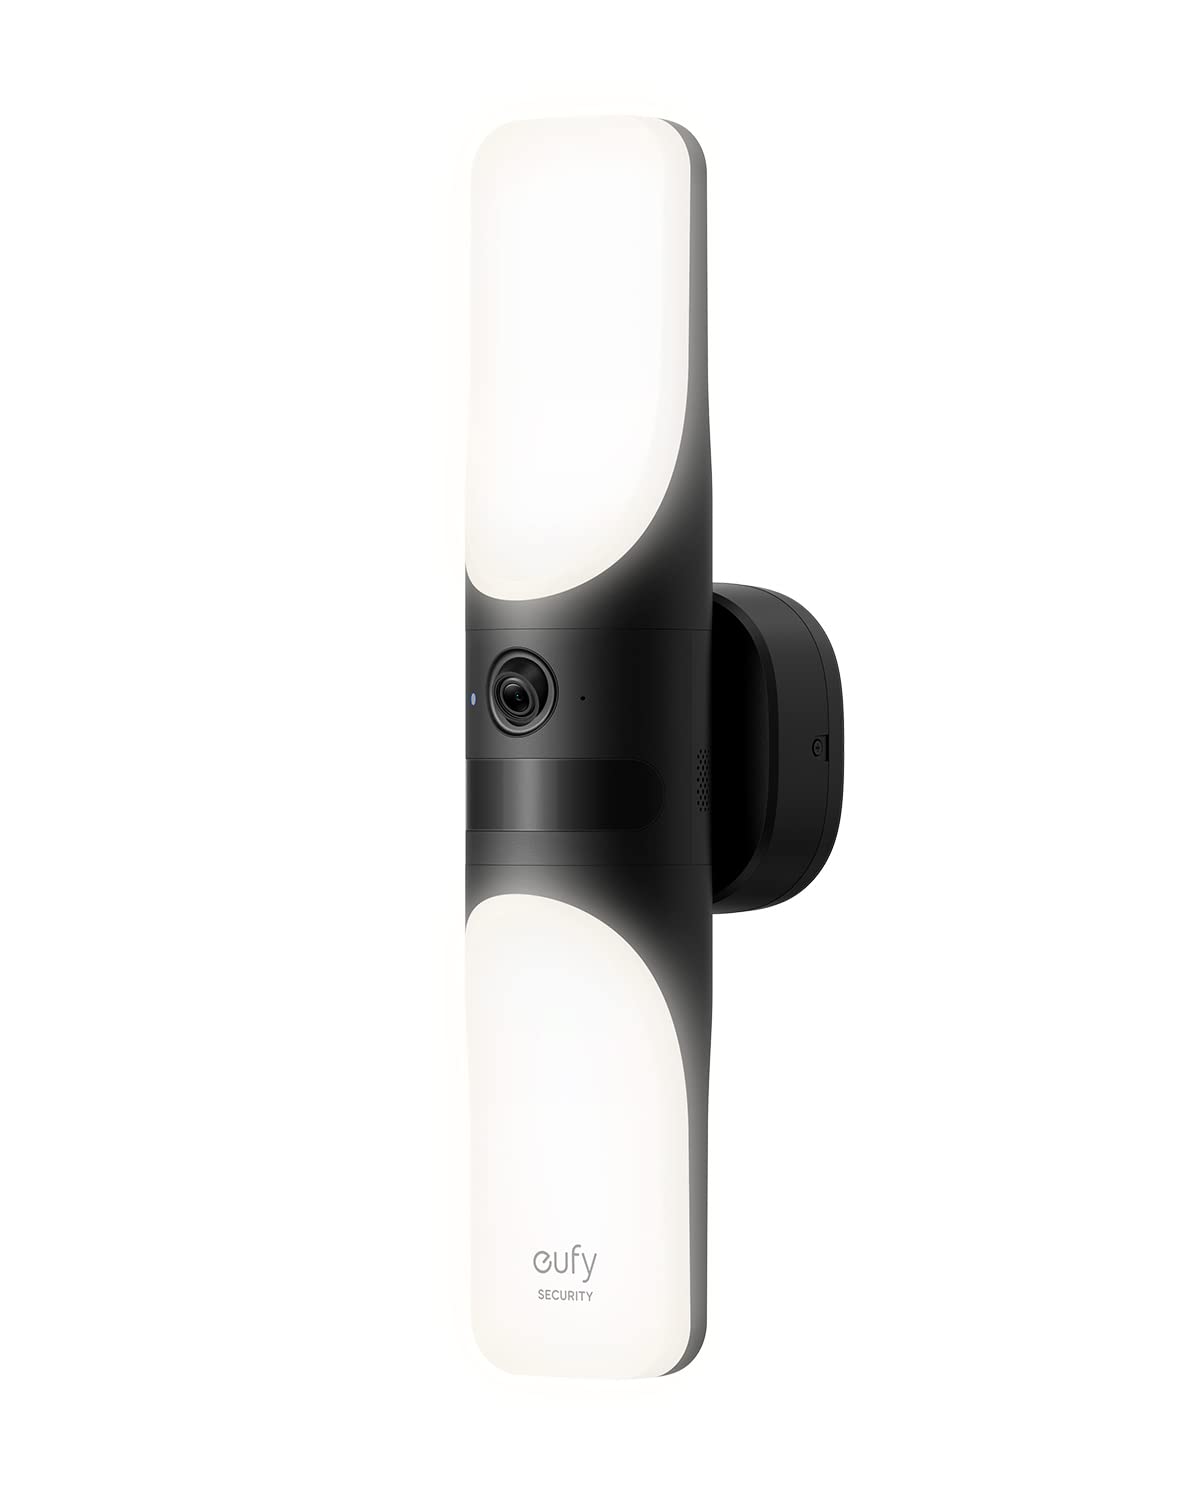 eufy Security S100 Wall Light Security Camera $90 + Free Shipping